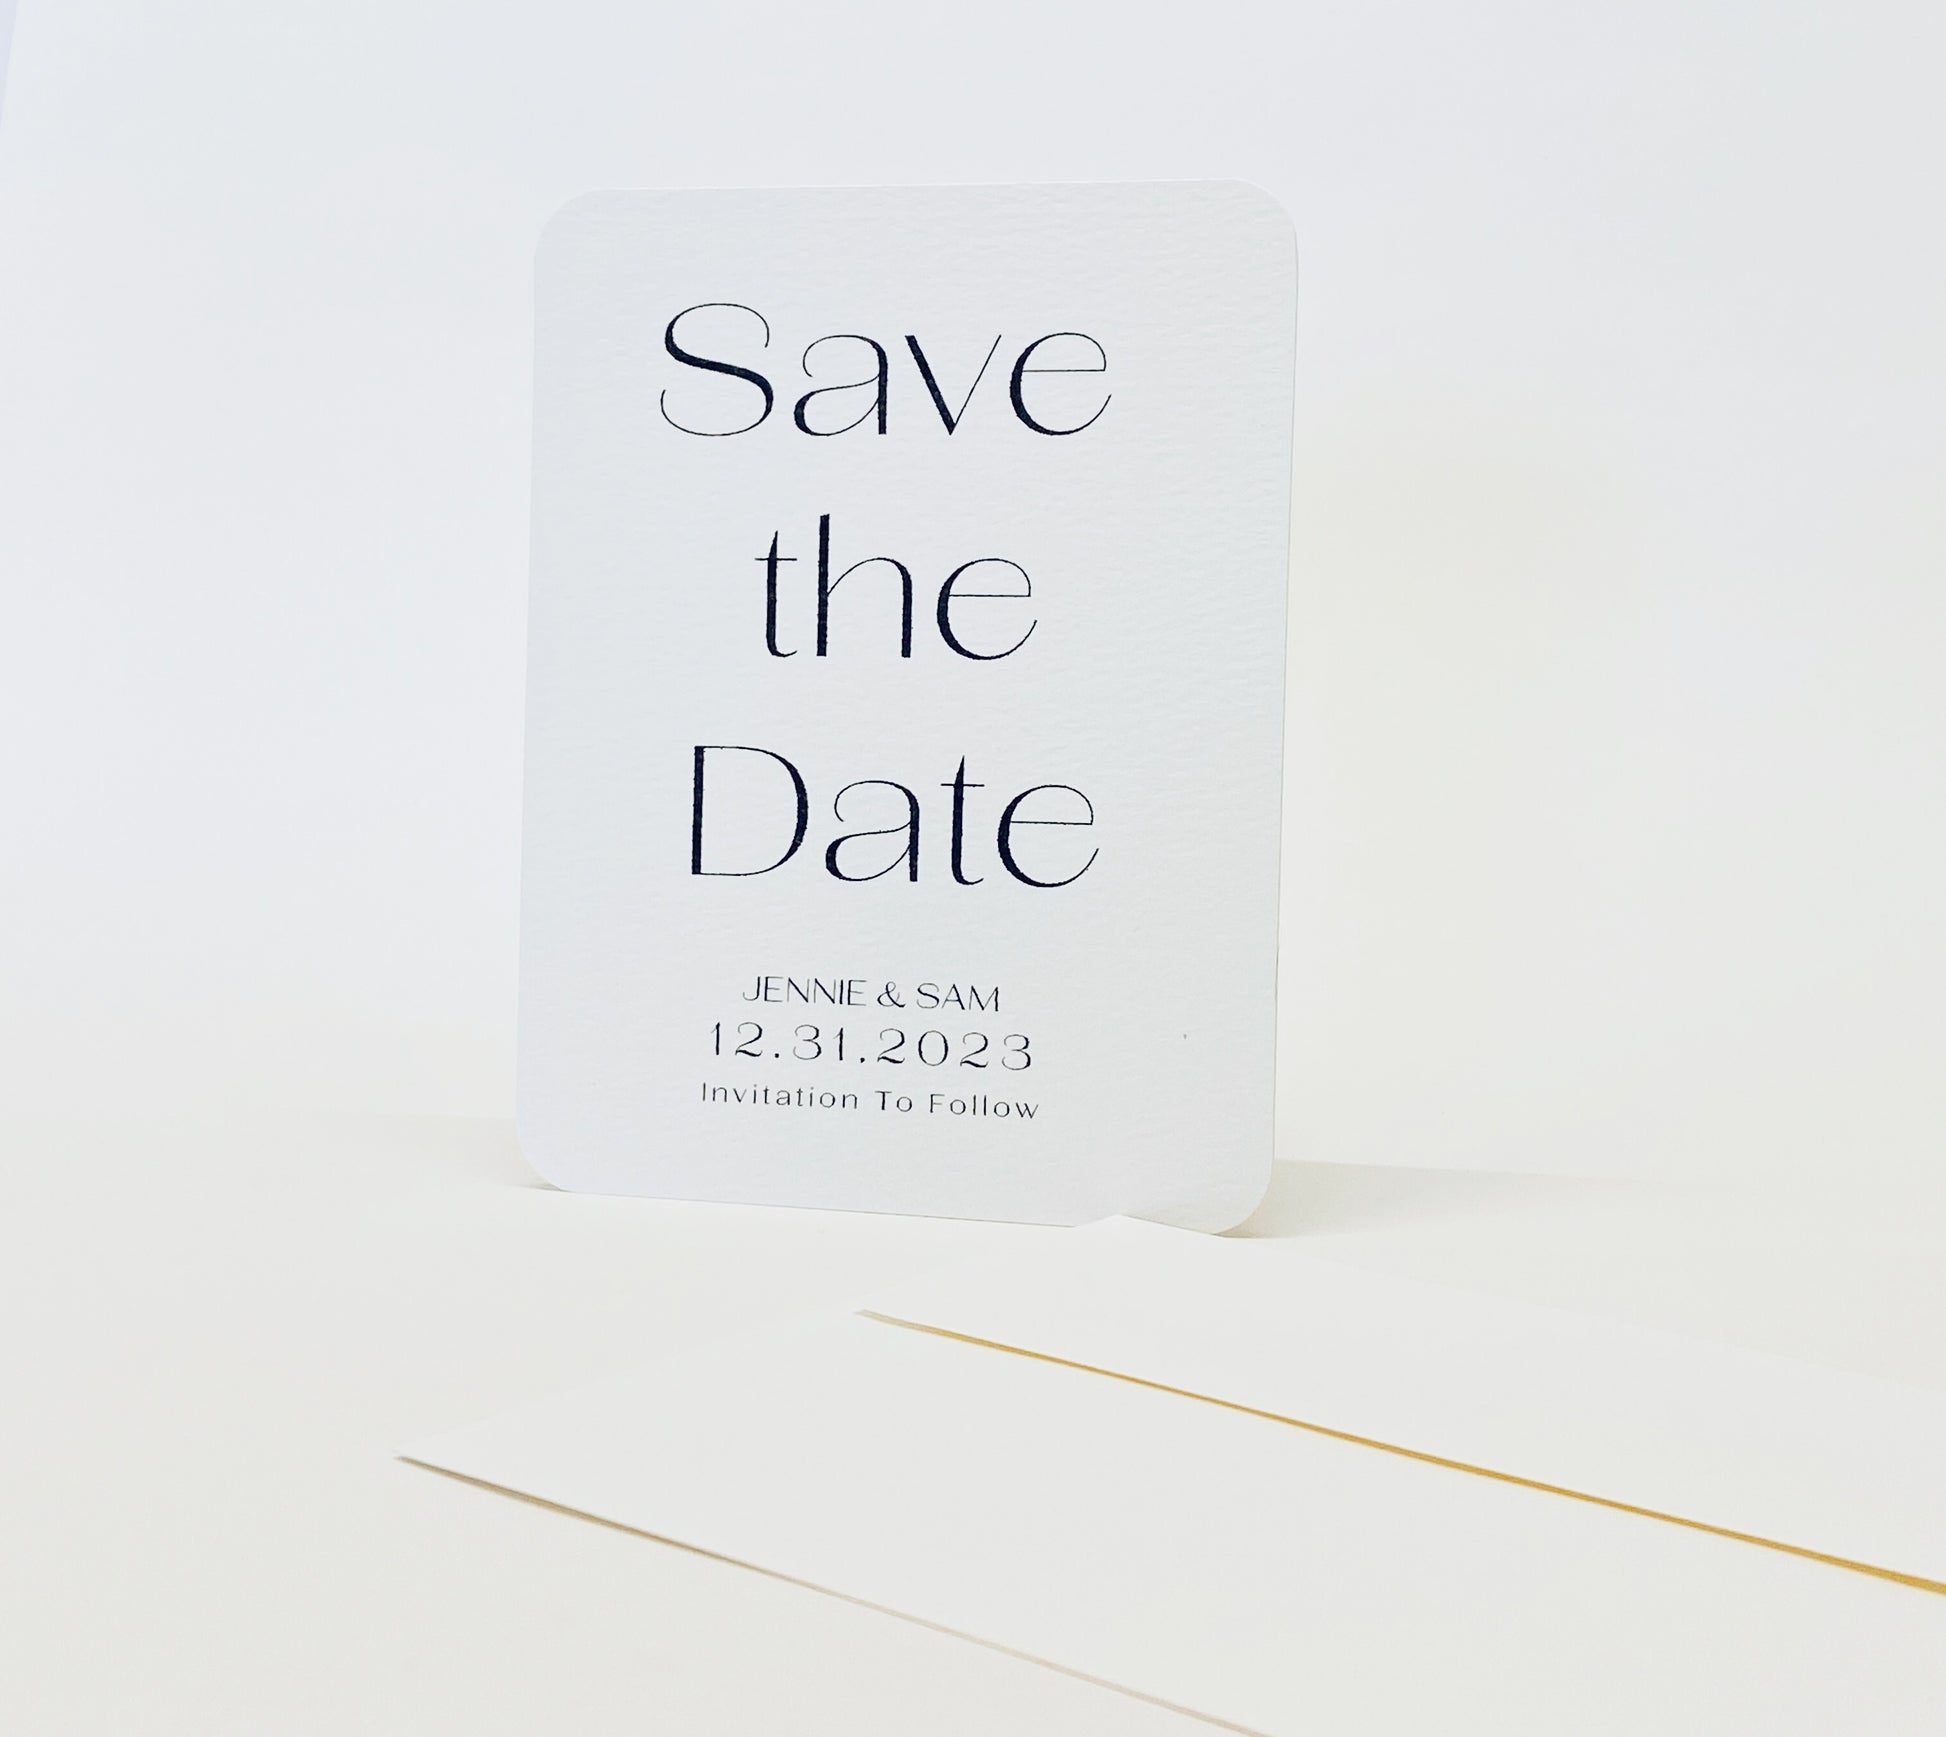 Simple Save the Date Card - Gallery360 Designs